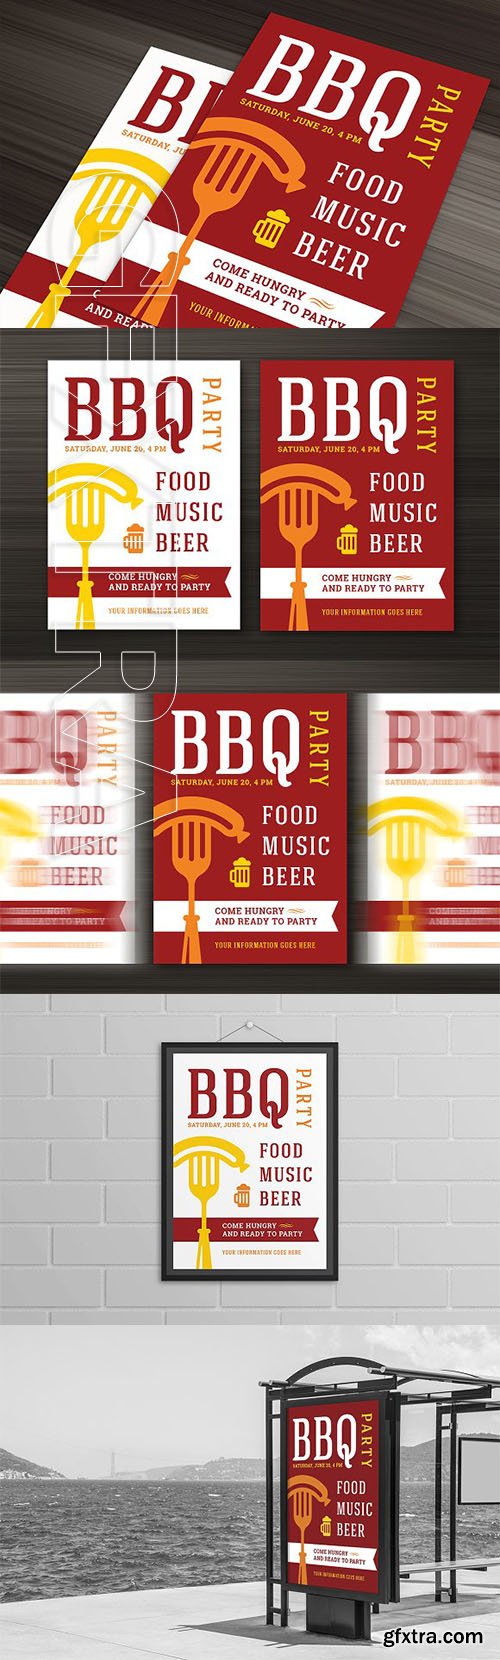 CreativeMarket - Barbecue Party Flyer Template 2634594